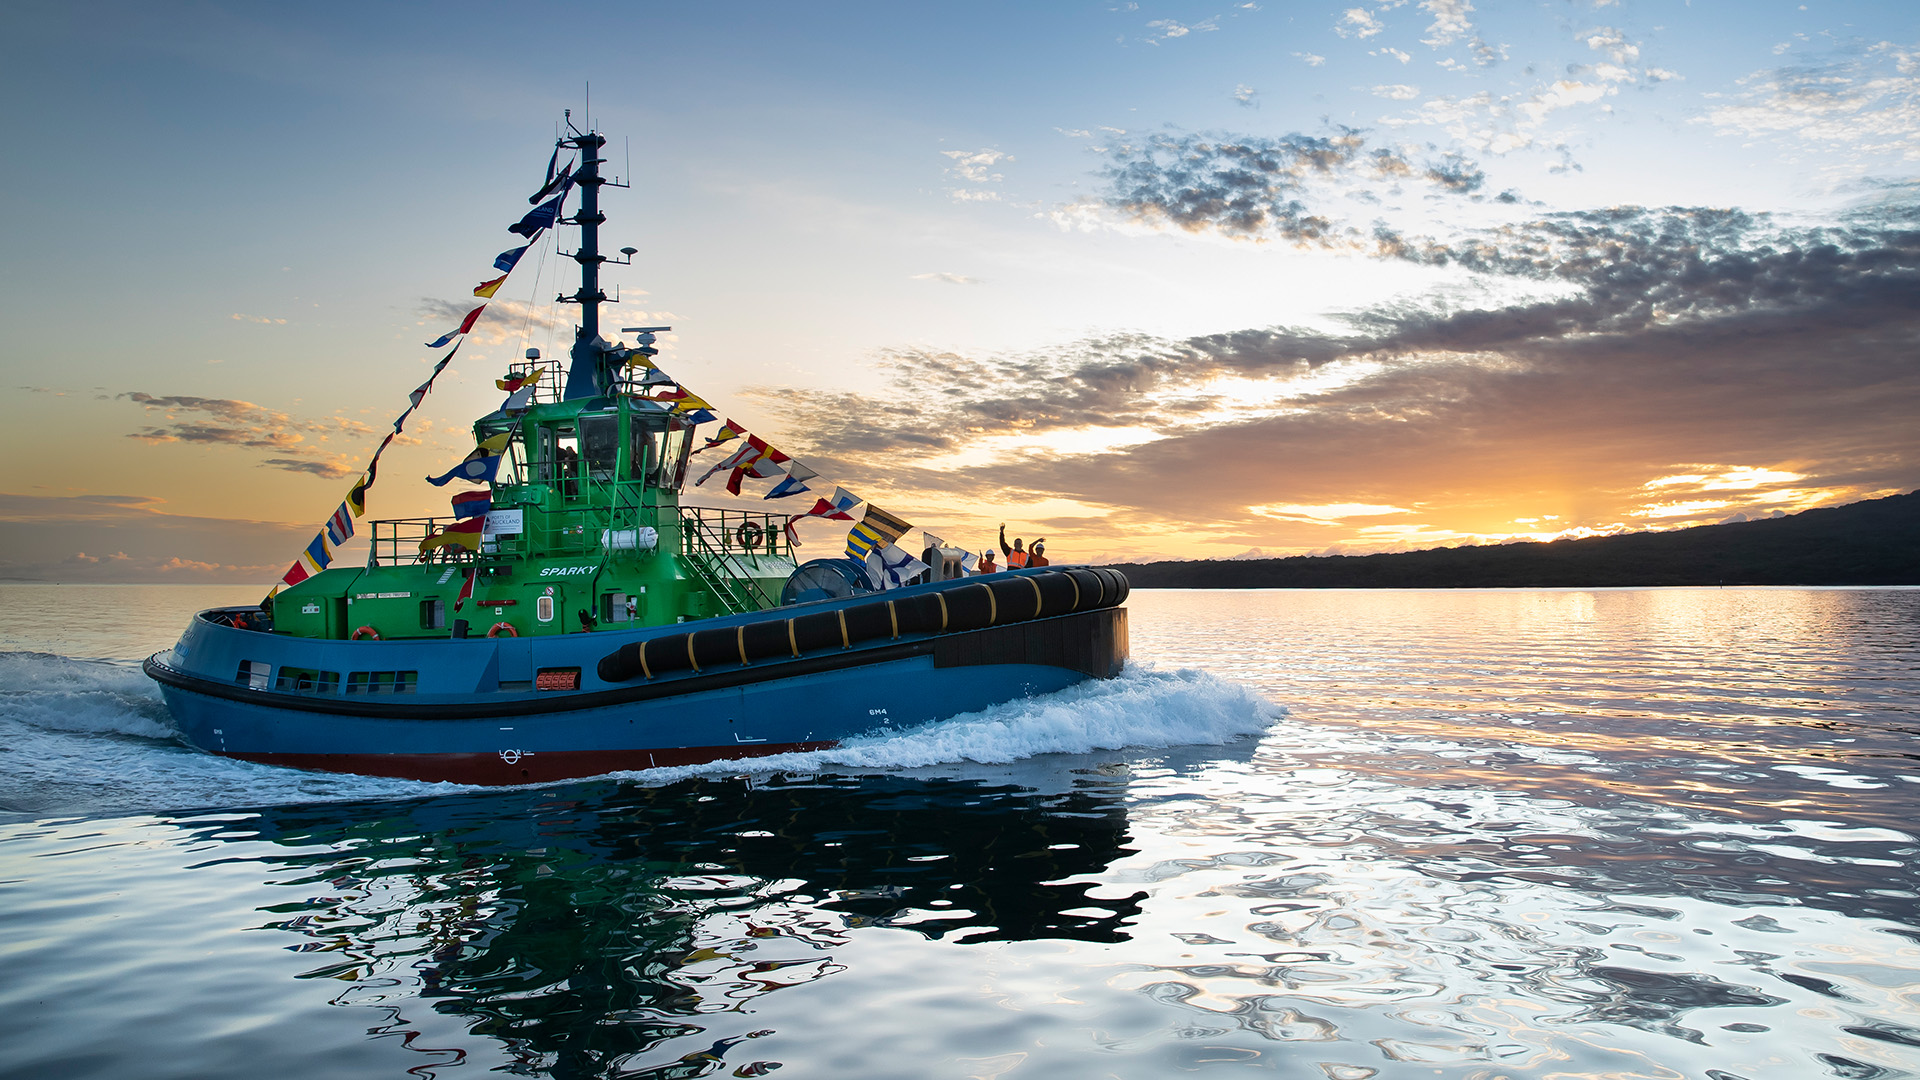 Sparky electric tugboat at sea